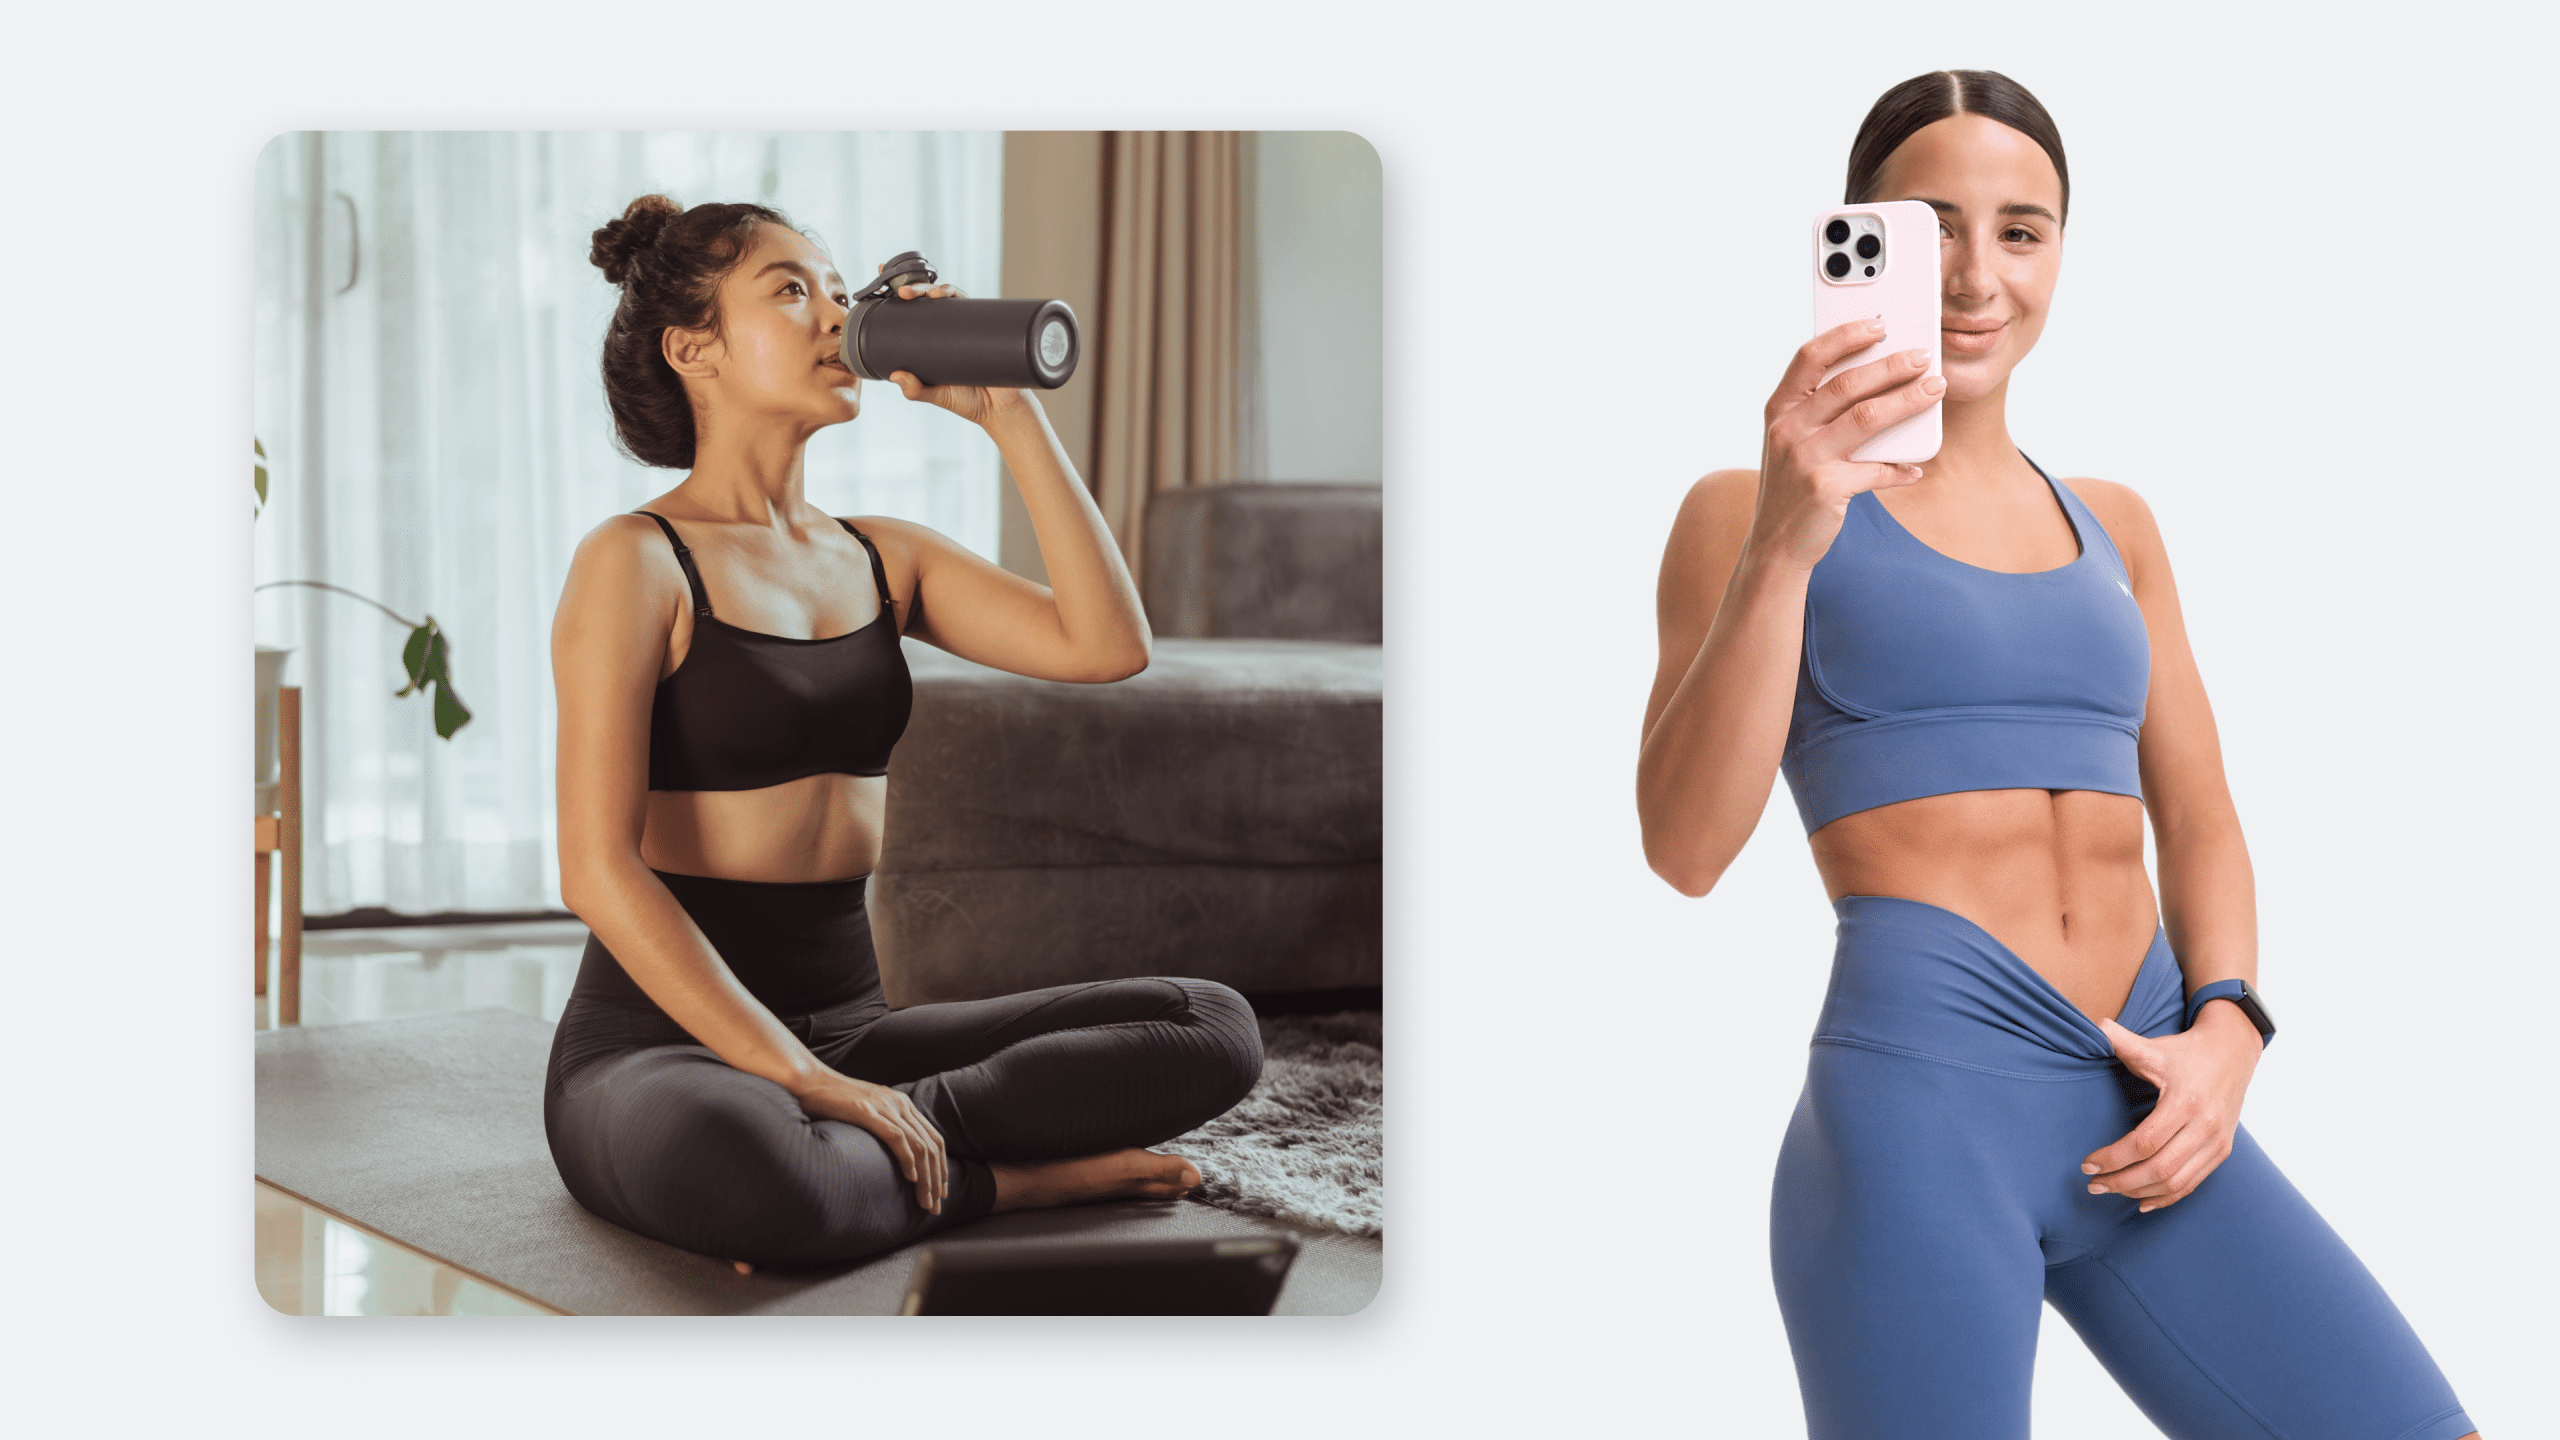 30-Day Fat Burner Challenge: Get Fit and Lean with This Workout - BetterMe